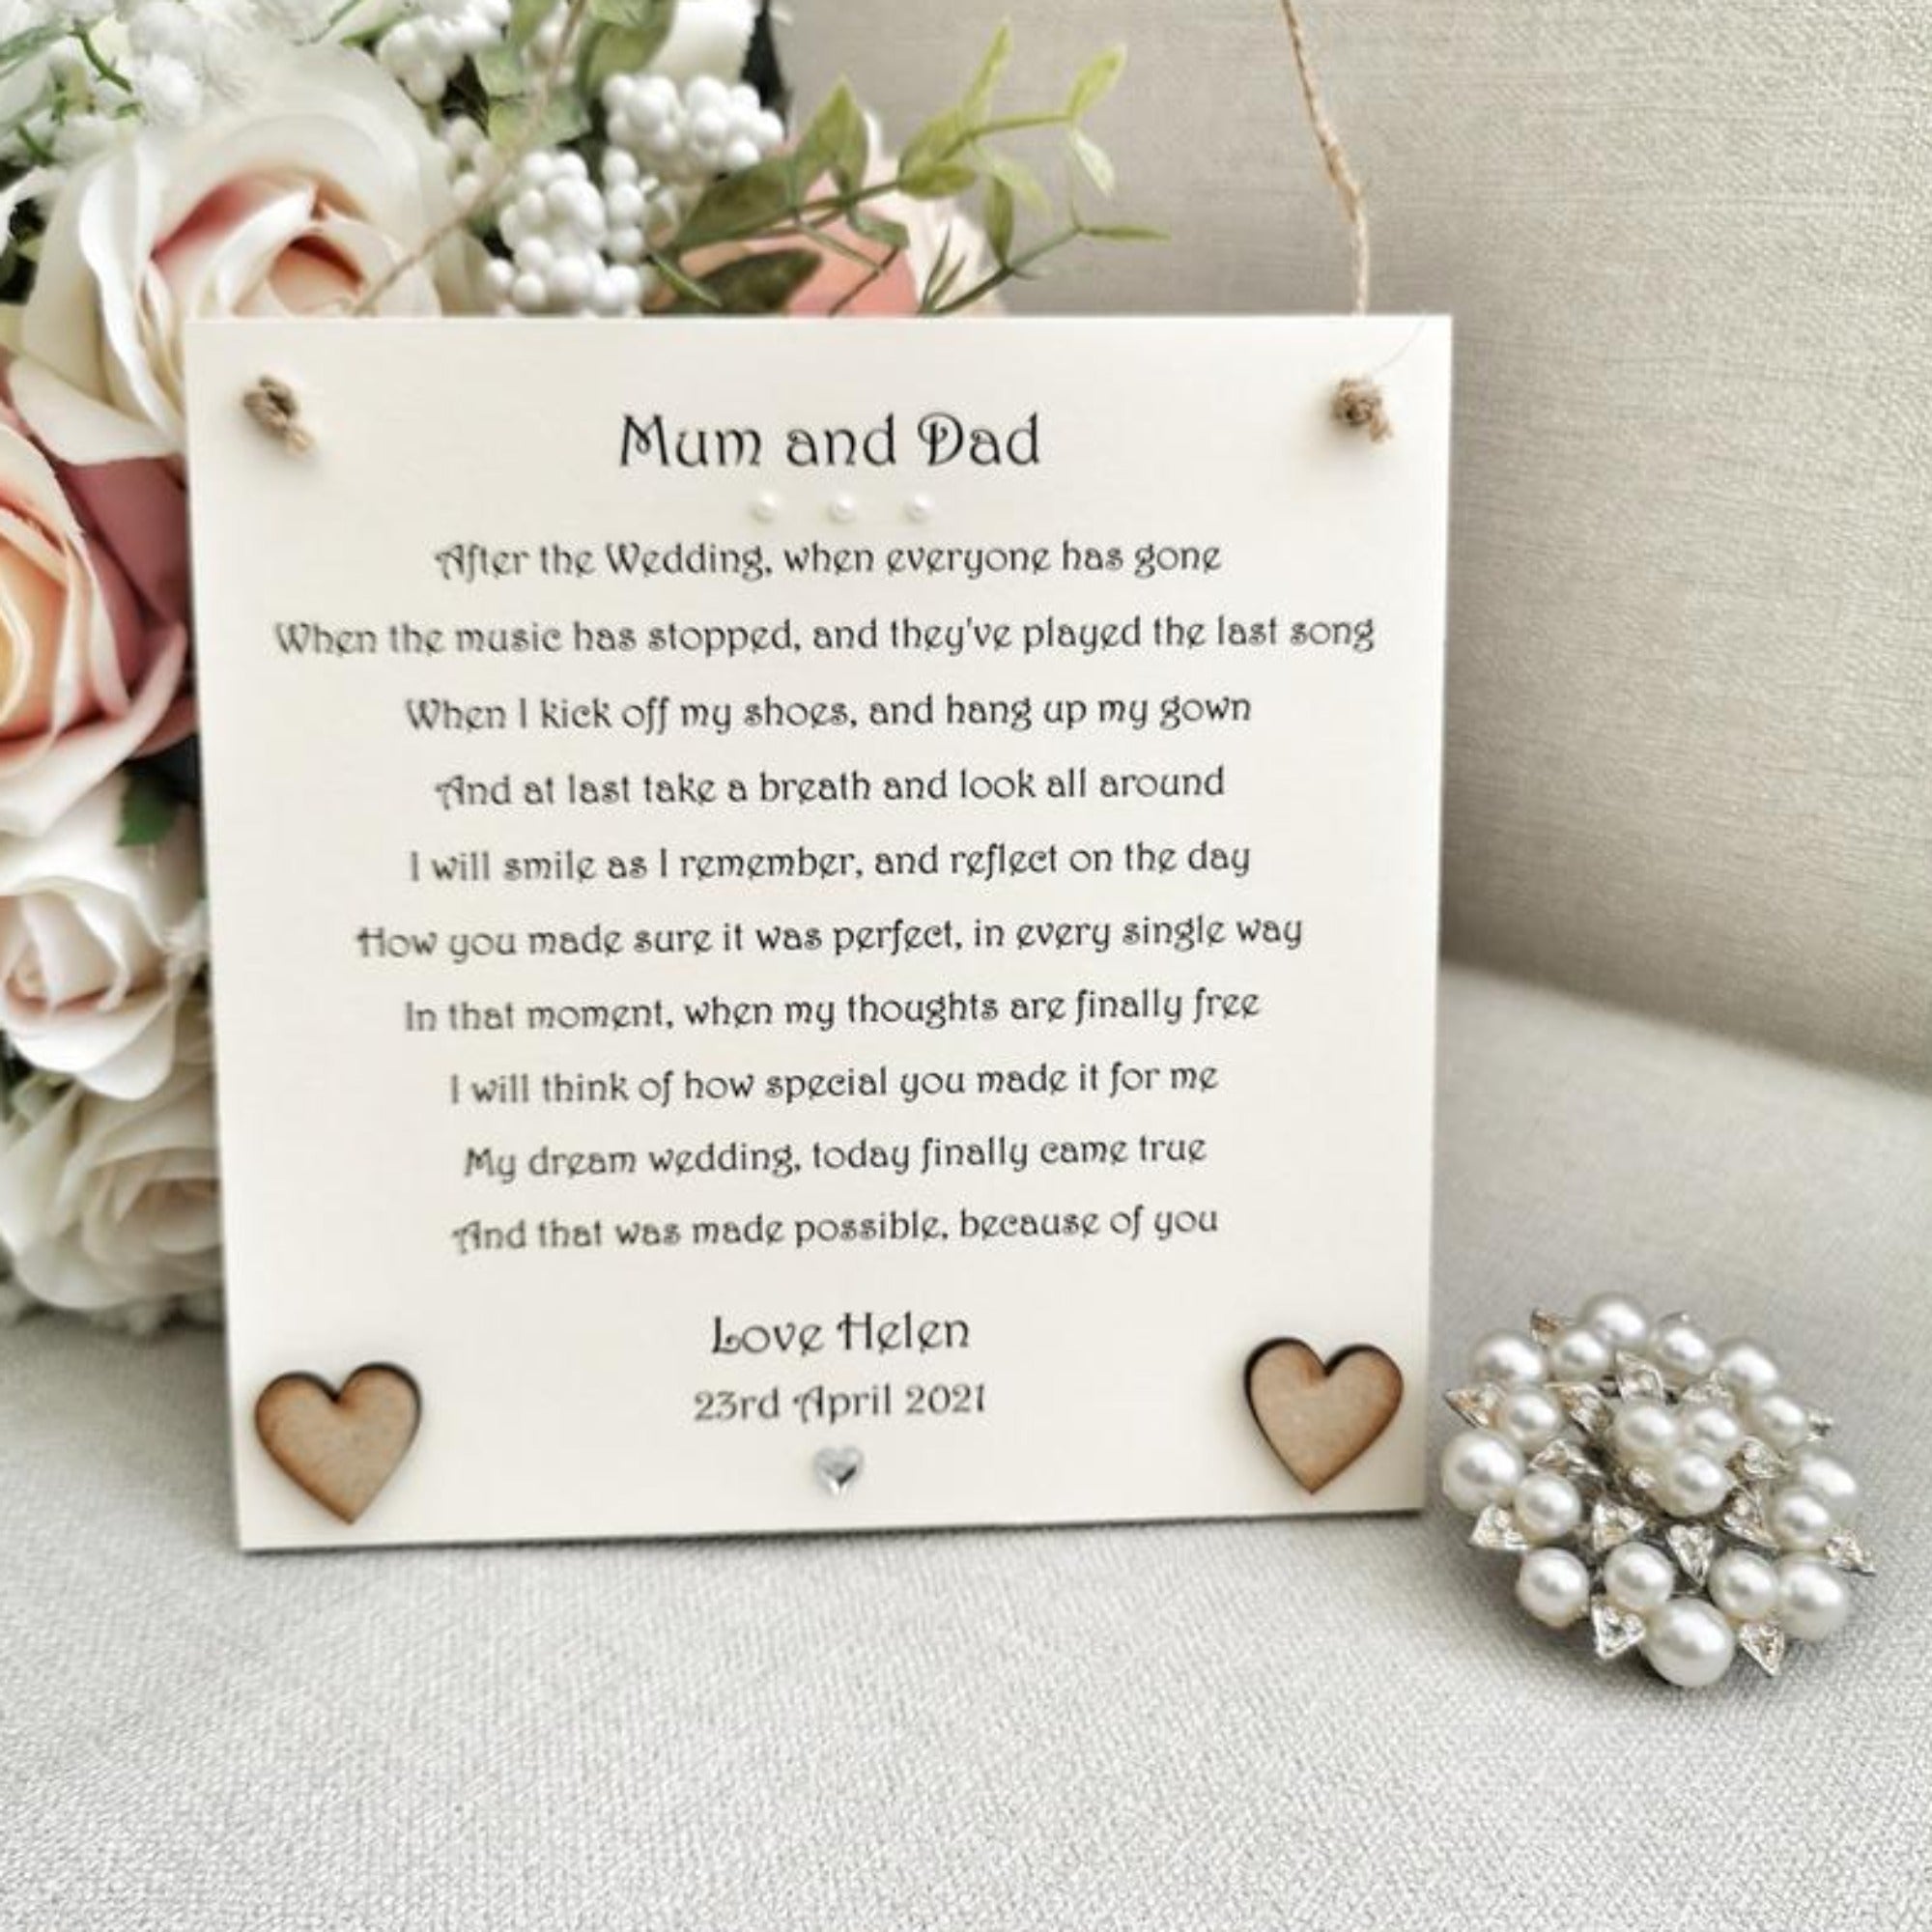 Thank You Photo Frame Gift for Parents of the Bride -Wedding Gifts for Mom  Dad of the Groom -Bridal Shower Gifts for Mom Dad - Picture Frame Gift for Mother  Father -for